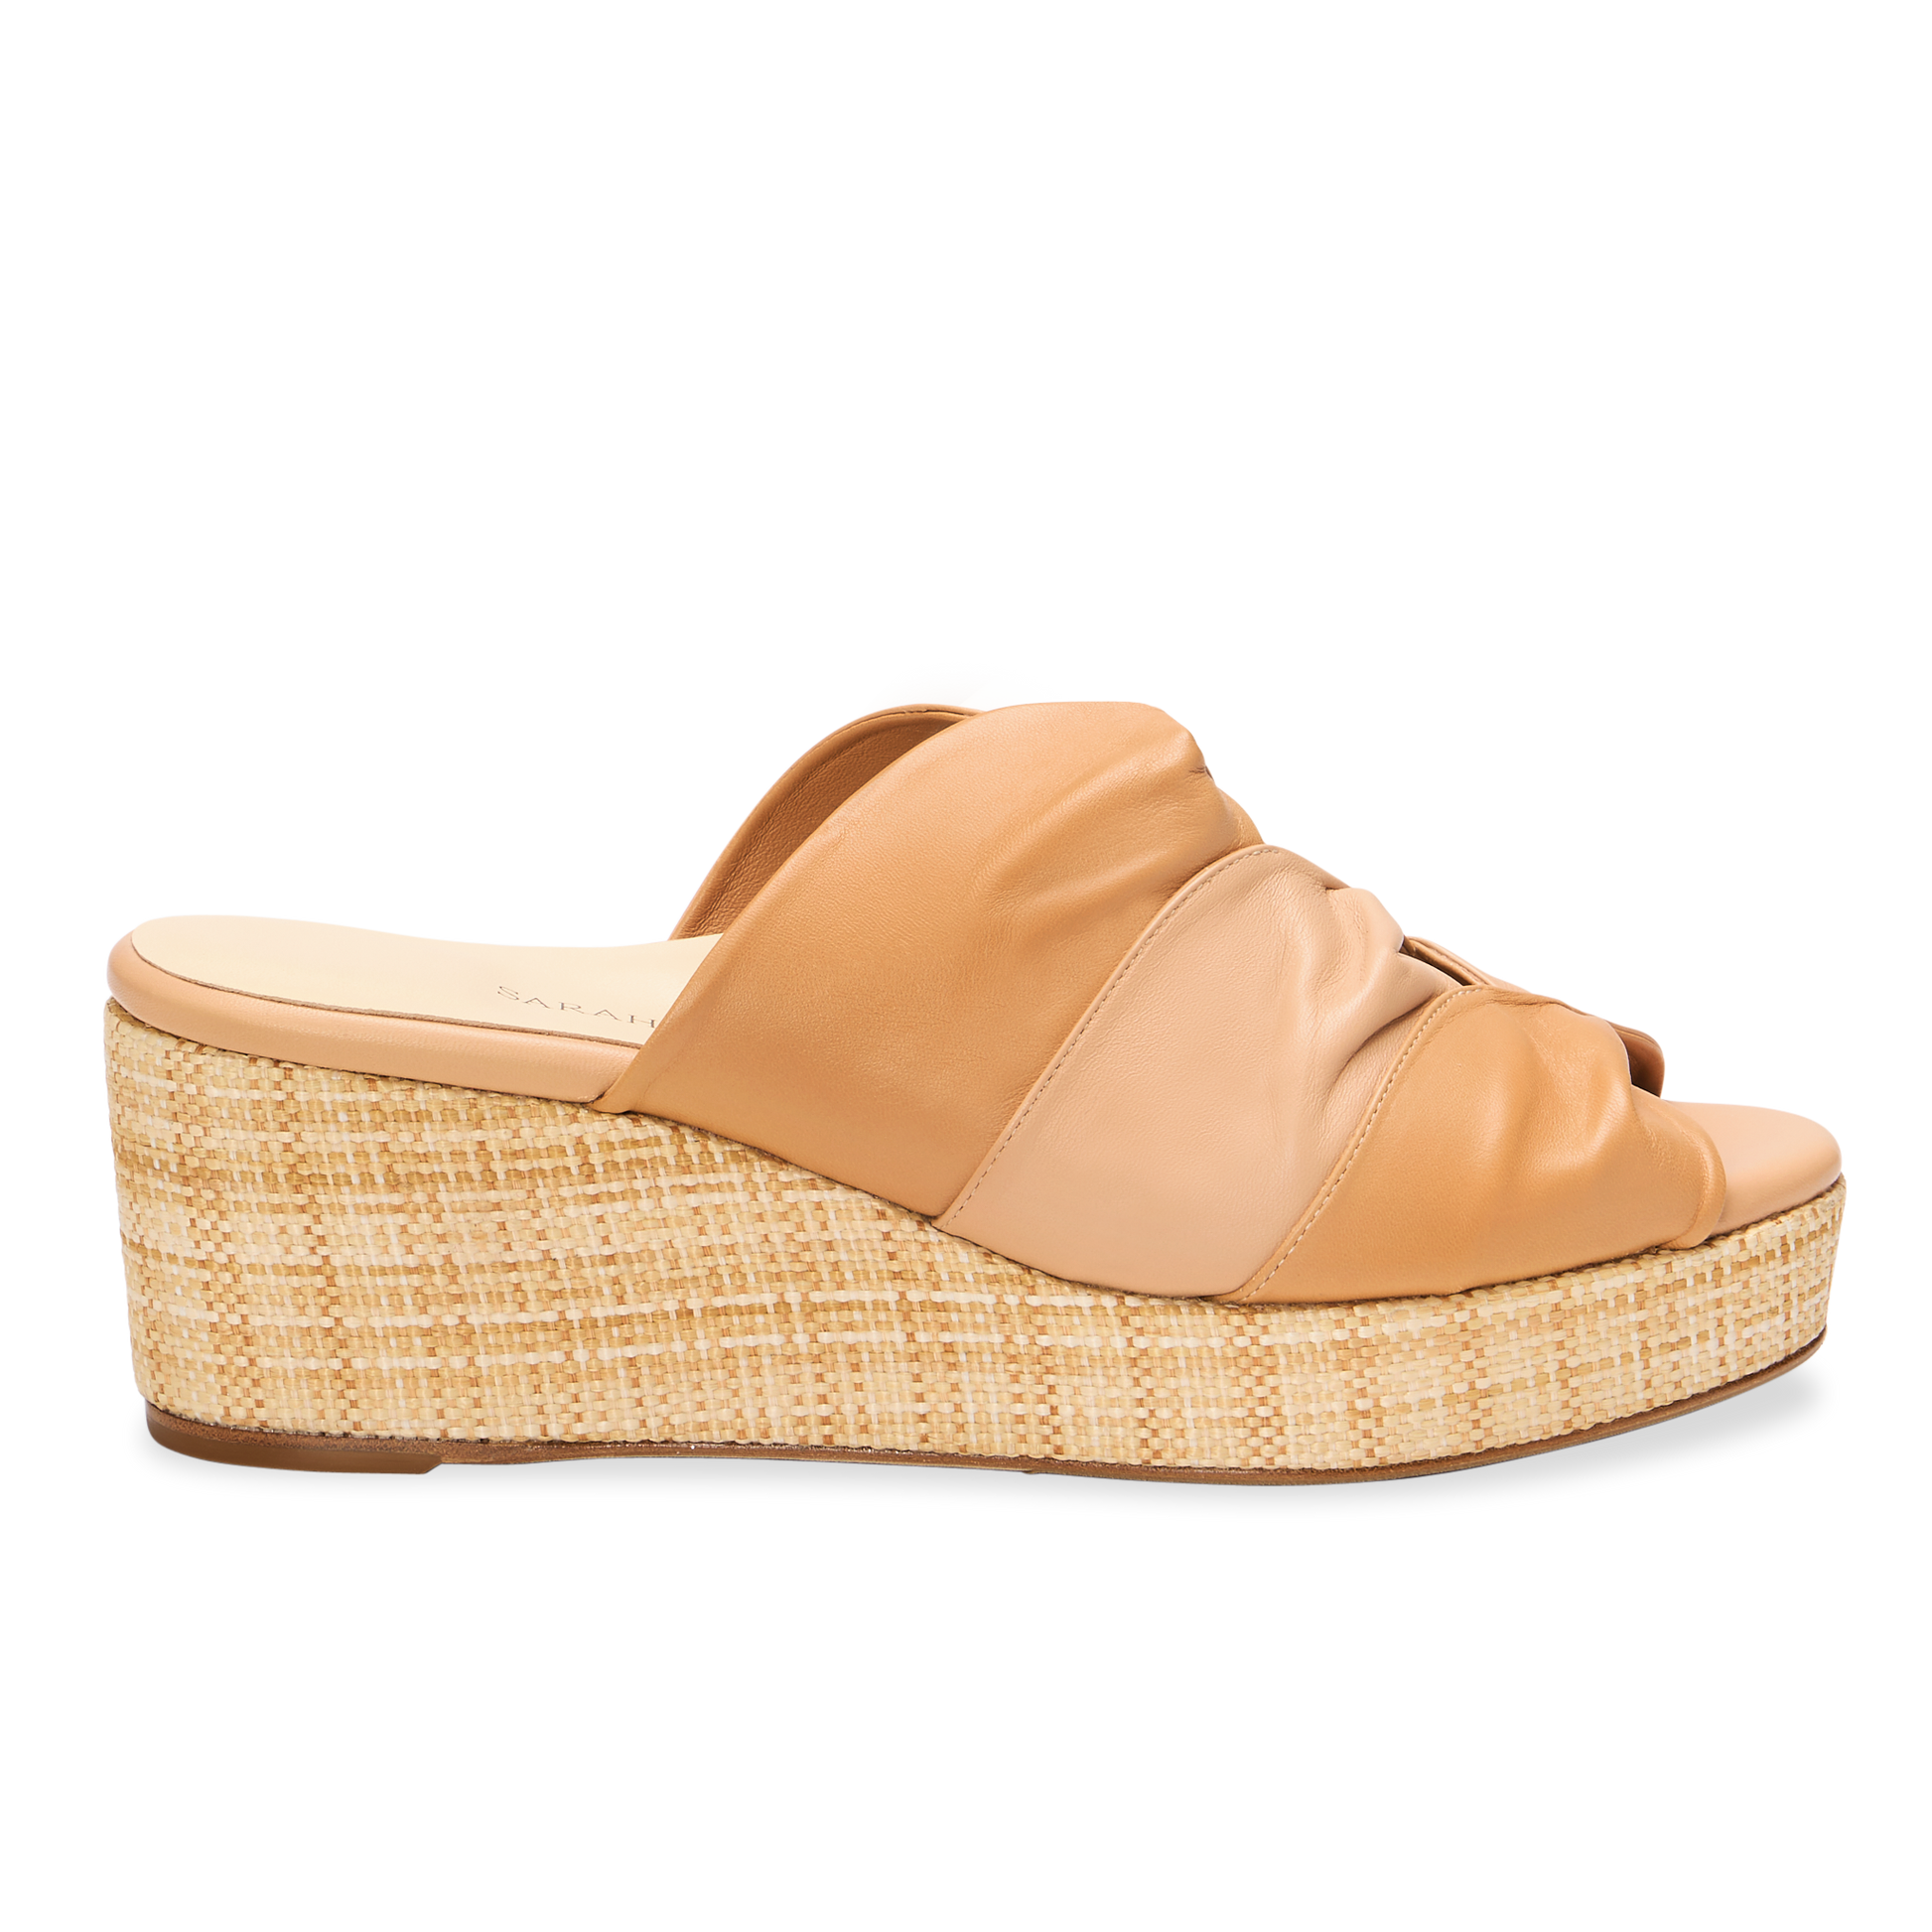 Perfect Arabesque Wedge 50 in Two-Tone Camel Nappa & Woven Wedge